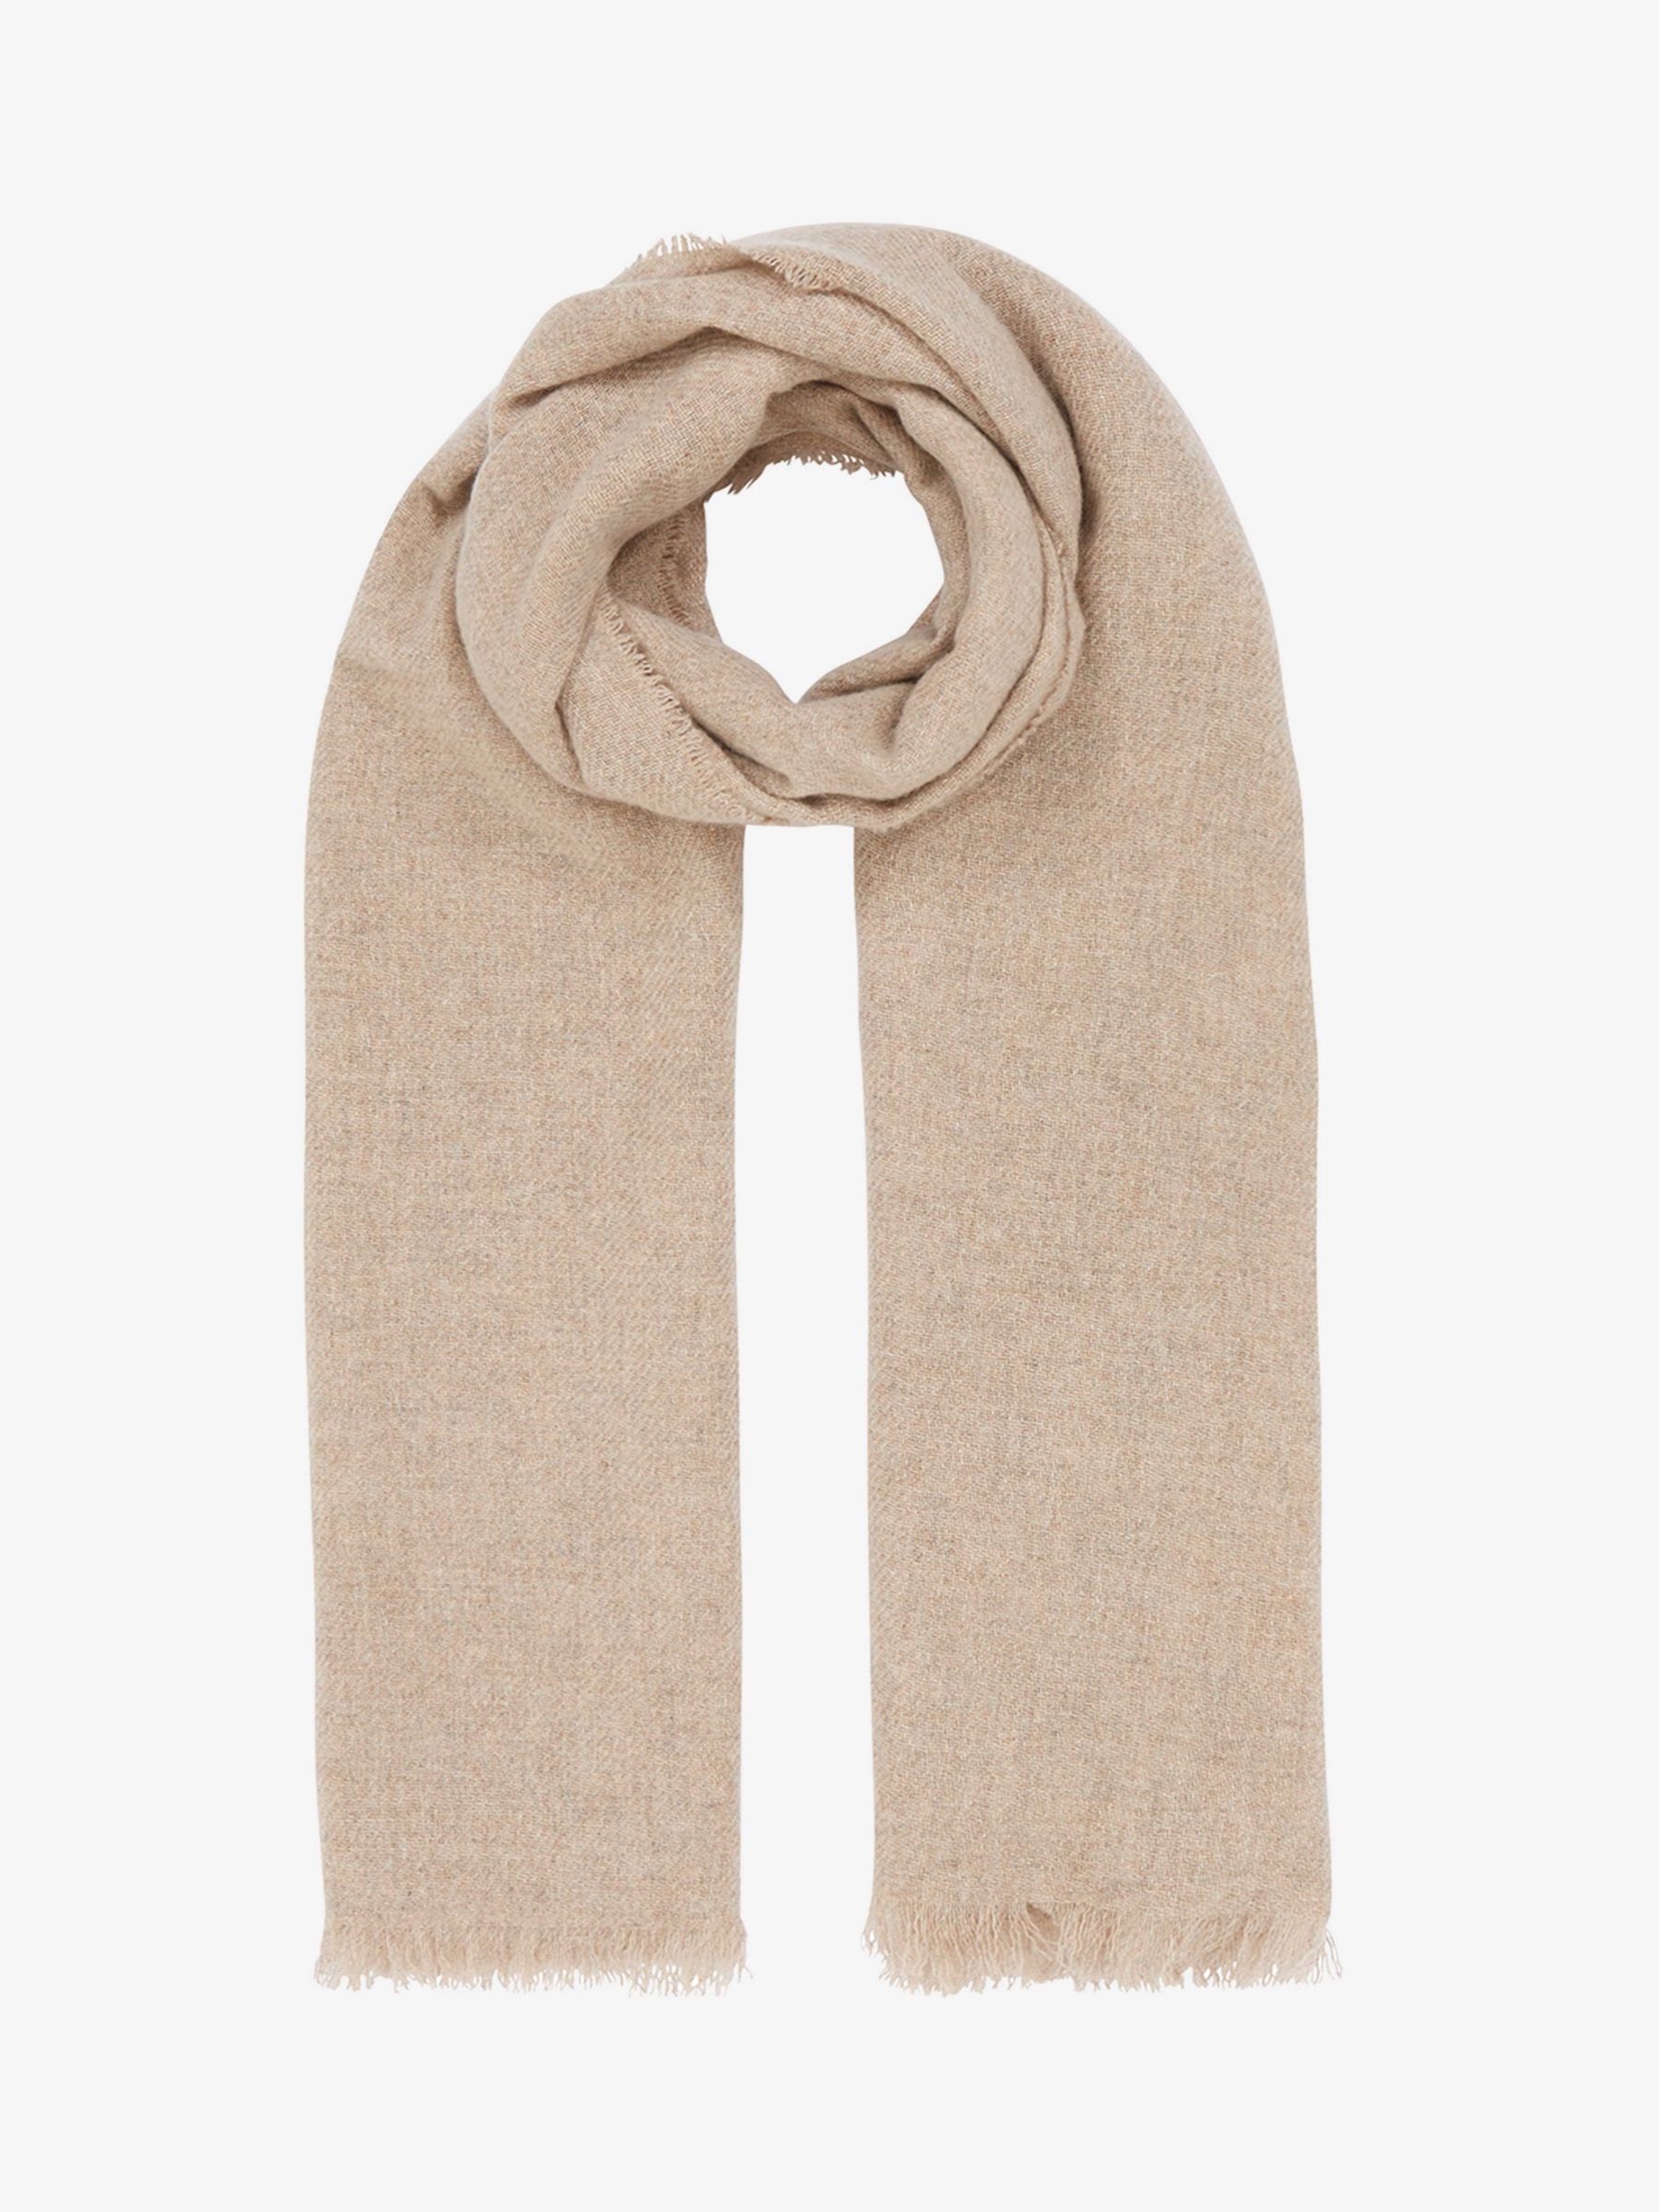 Brora Cashmere Stole Scarf, Oatmeal at John Lewis & Partners